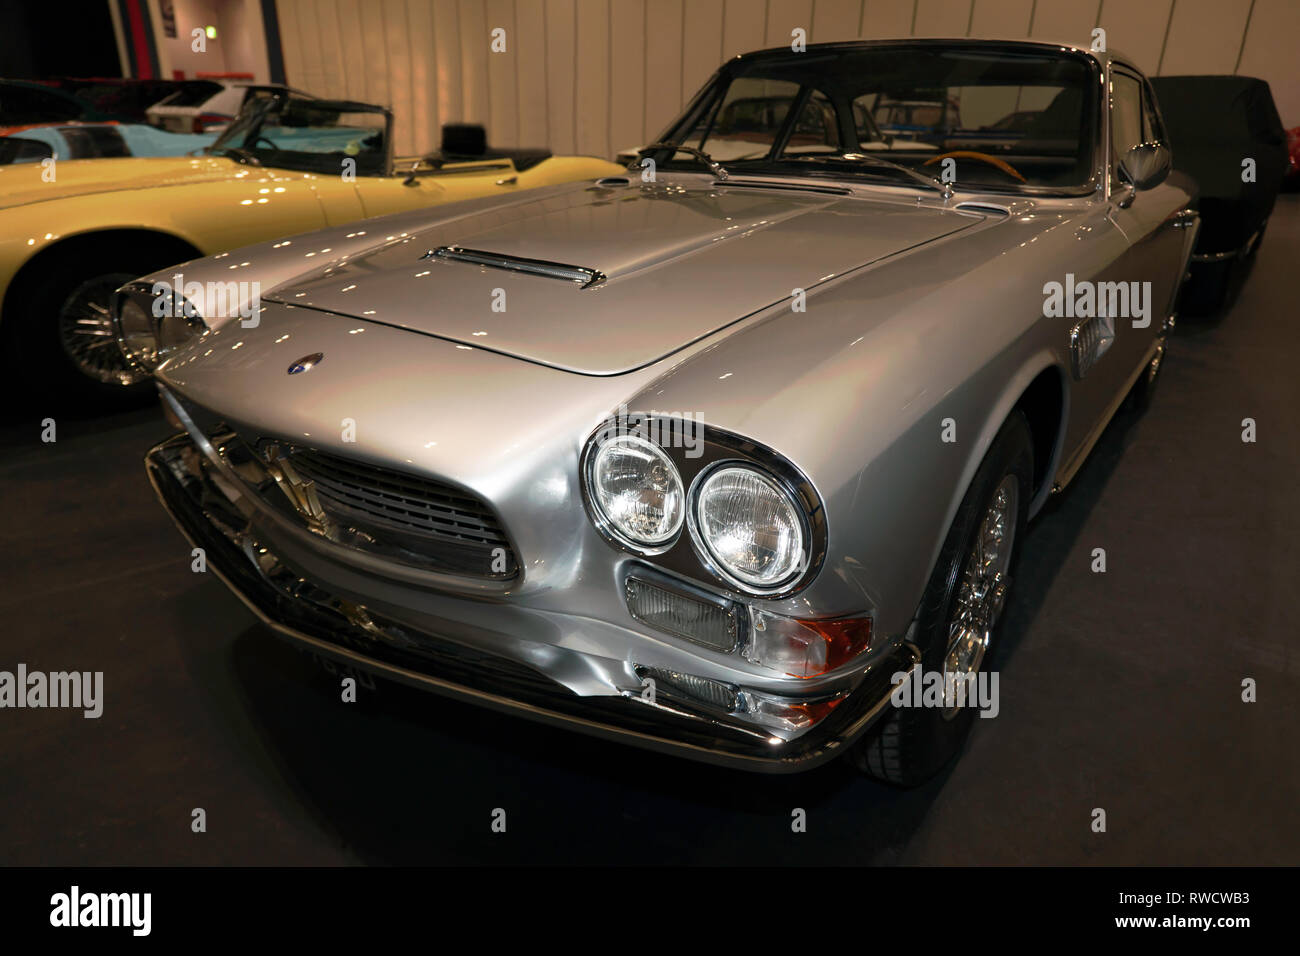 Three-quarter front view of a Silver, 1966, Maserati Sebring Series 2, on display in the Paddock Area of the 2019 London Classic Car Show Stock Photo